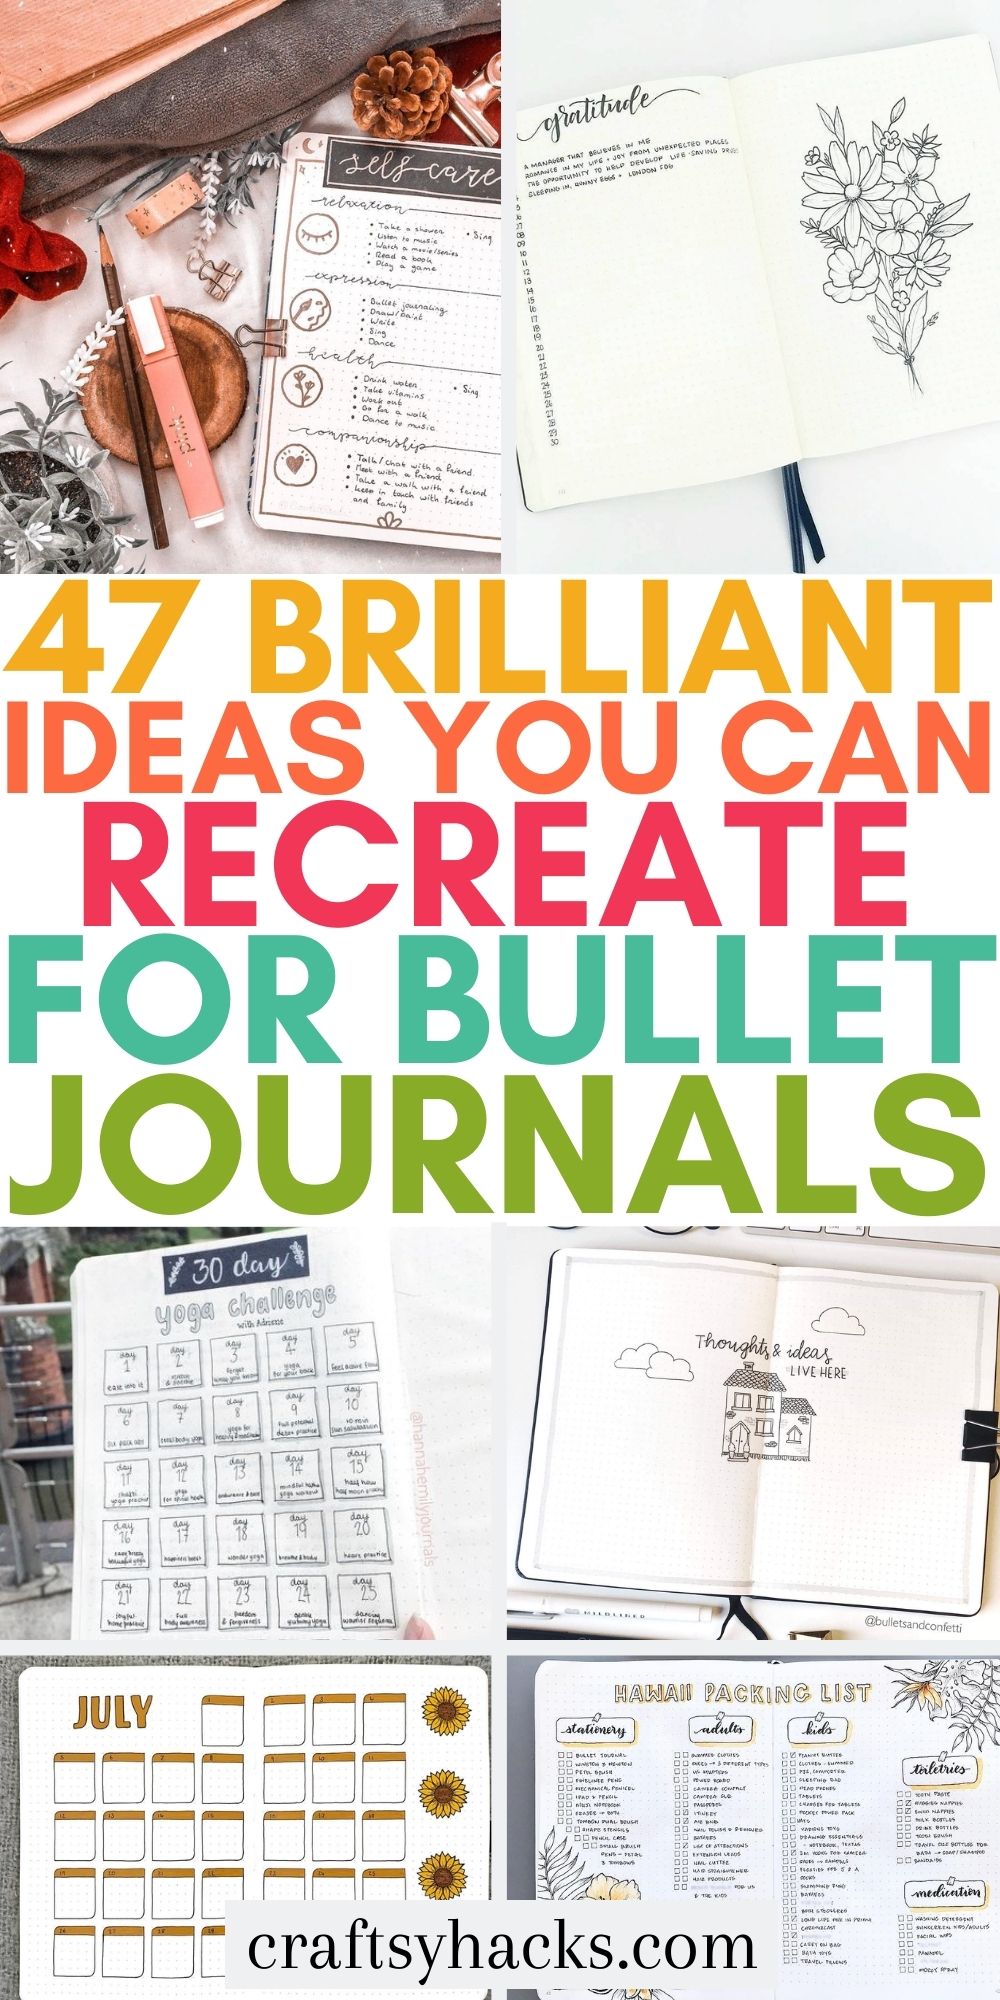 47 Amazing Bullet Journal Ideas You Need to Steal - Craftsy Hacks